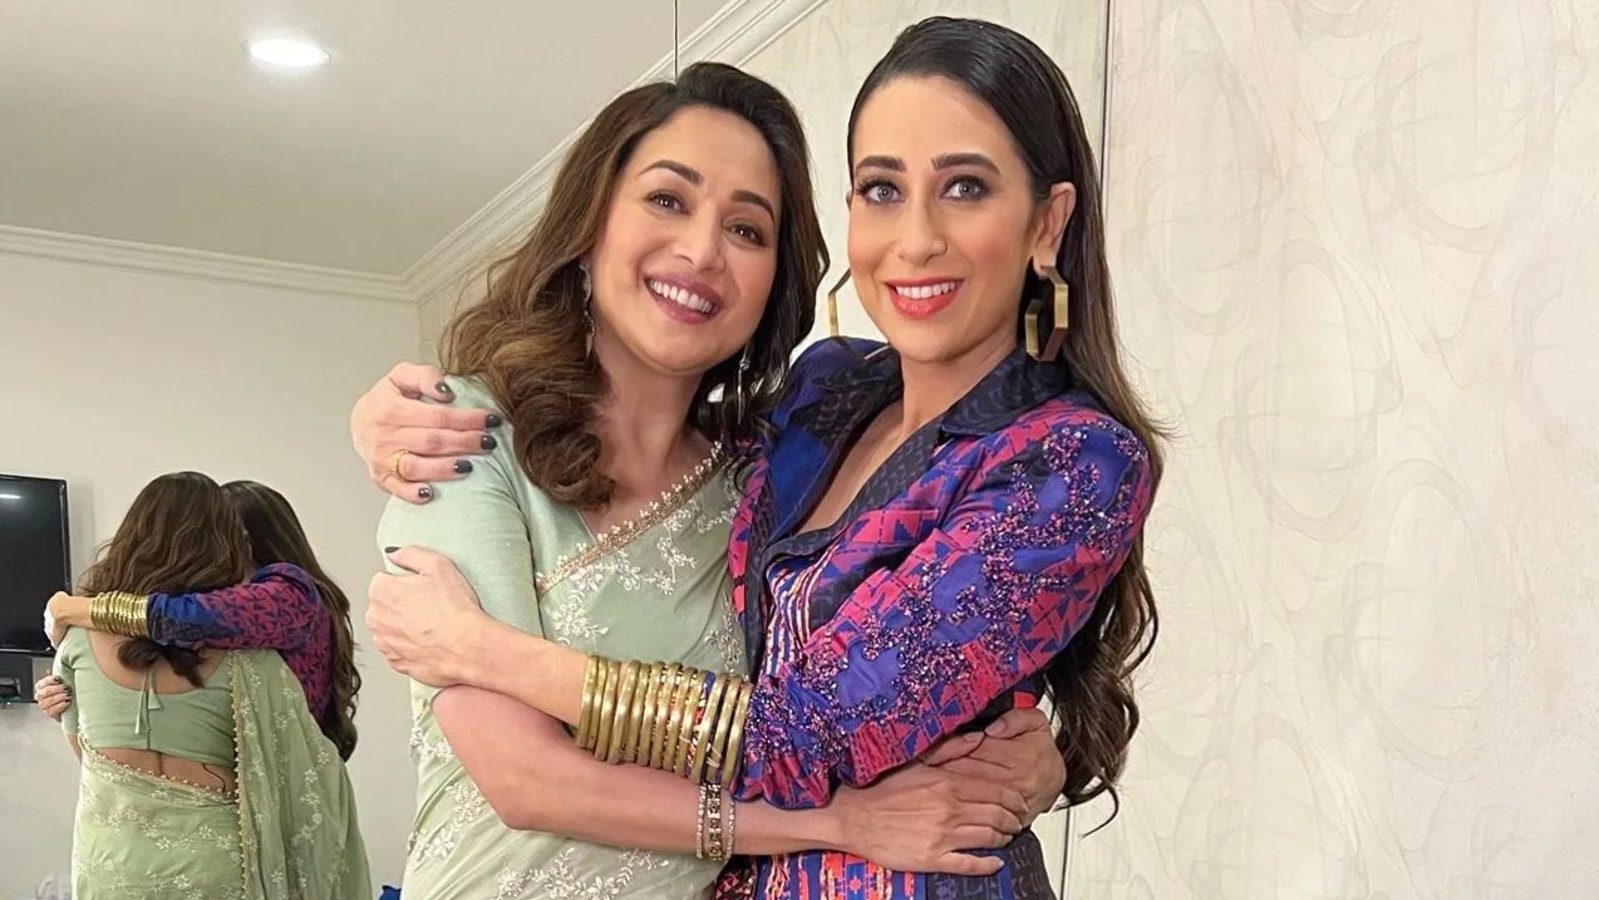 Karishma Kapoor Blue Film Xxx - Madhuri-Karisma pose together in new pic, fans 'getting Dil To Pagal Hai  vibes' | Bollywood - Hindustan Times